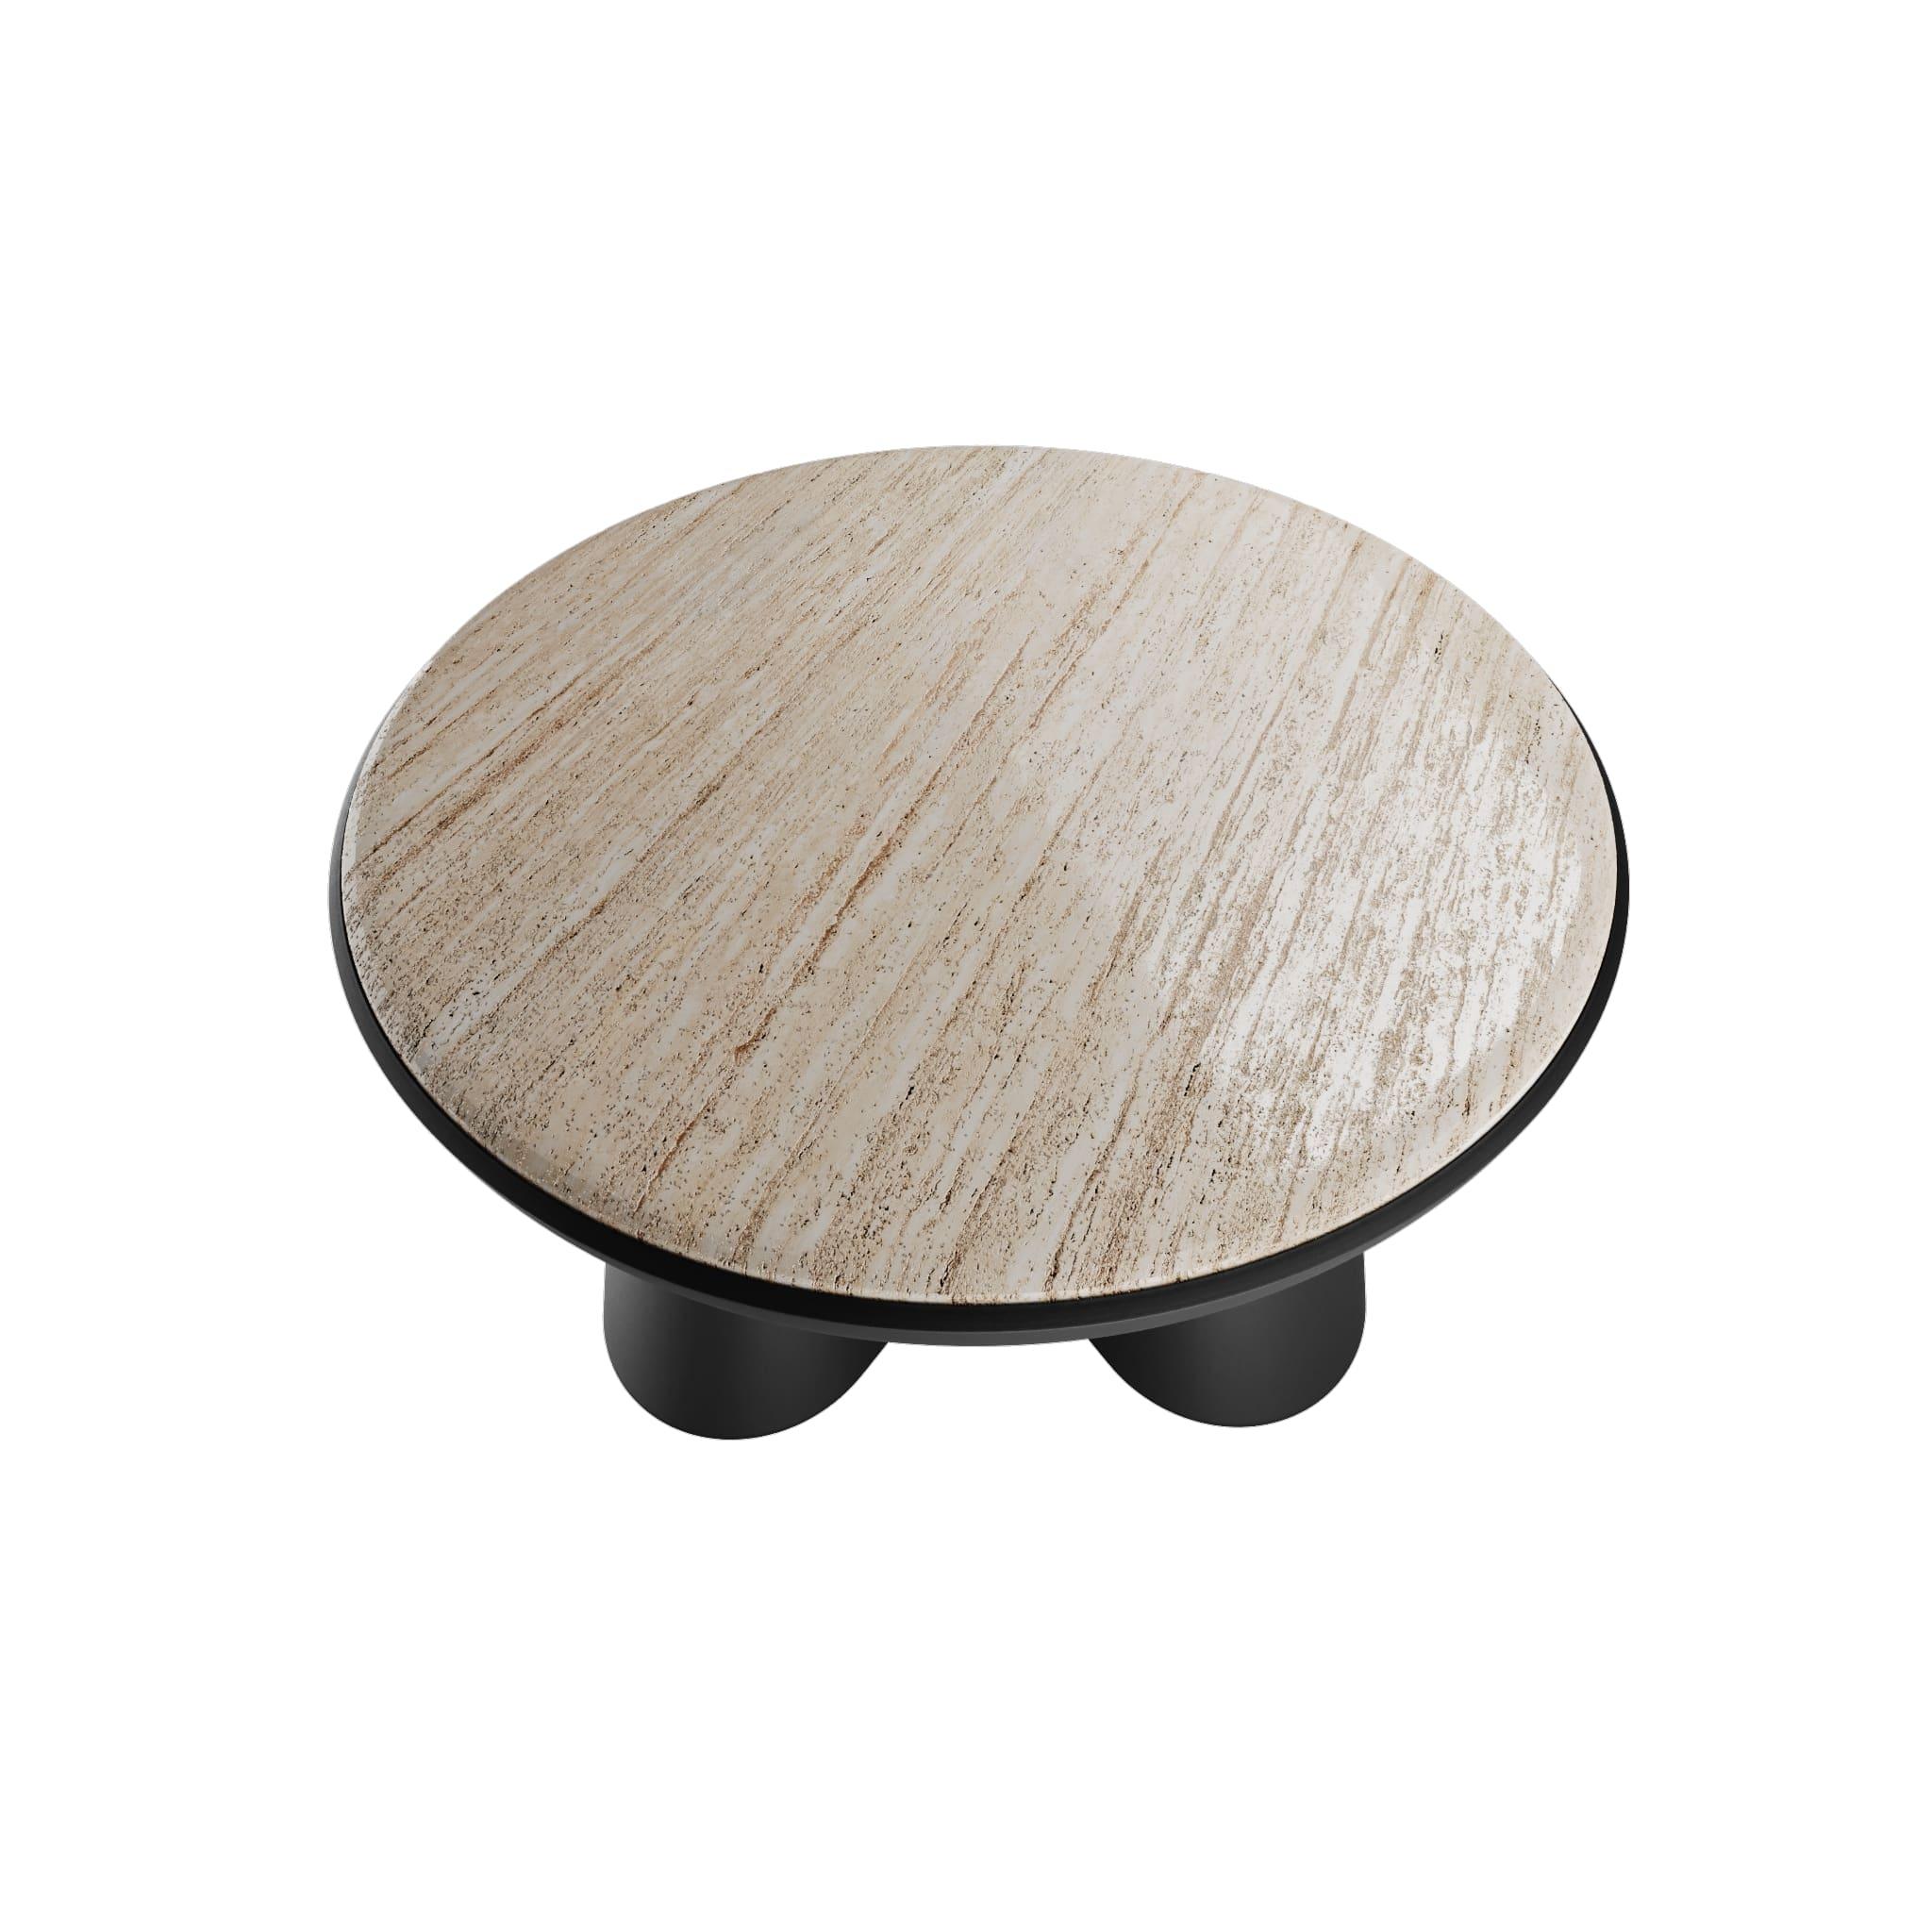 Fifih Center Table Black & Travertine is a modern coffee table with a captivating mix of textures and a minimal silhouette. Fifih Center Table Black & Travertine can be displayed either as a statement piece or combined with the other pieces of the